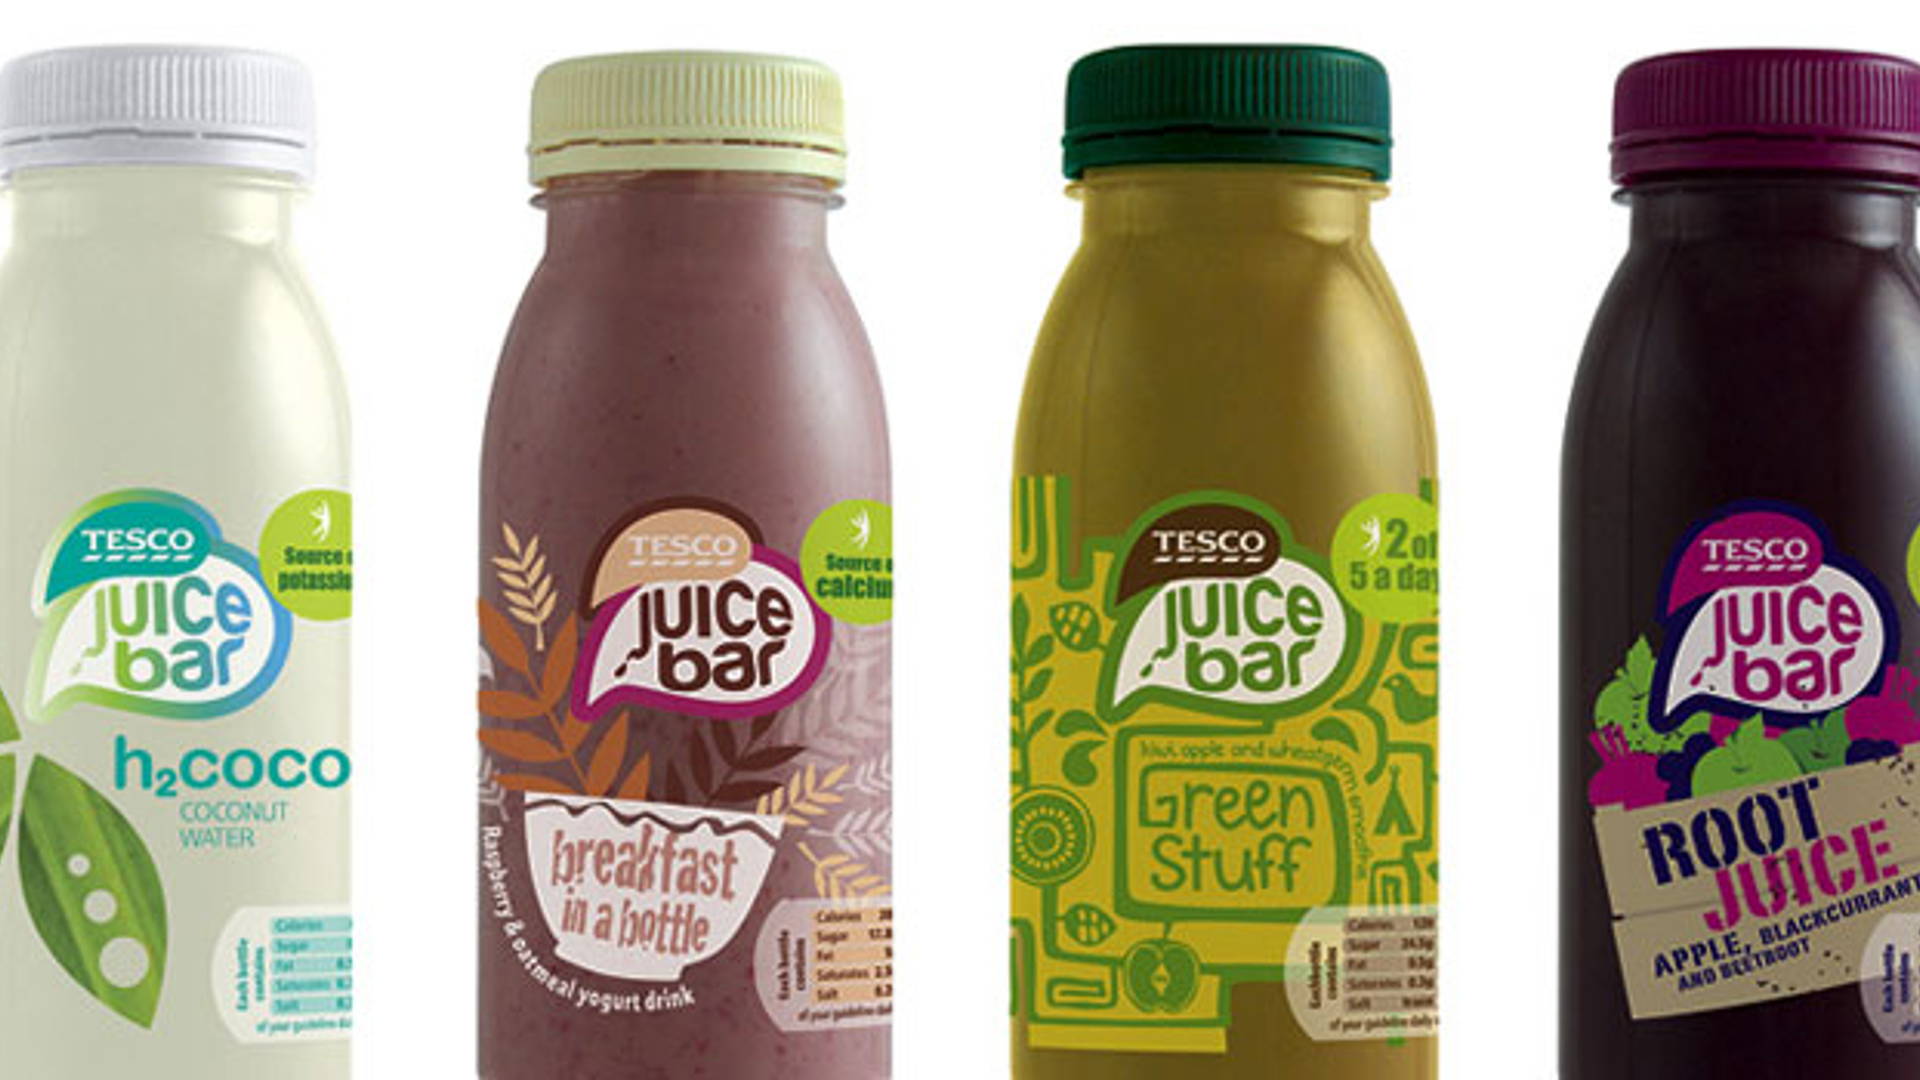 Featured image for Tesco: Juice Bar